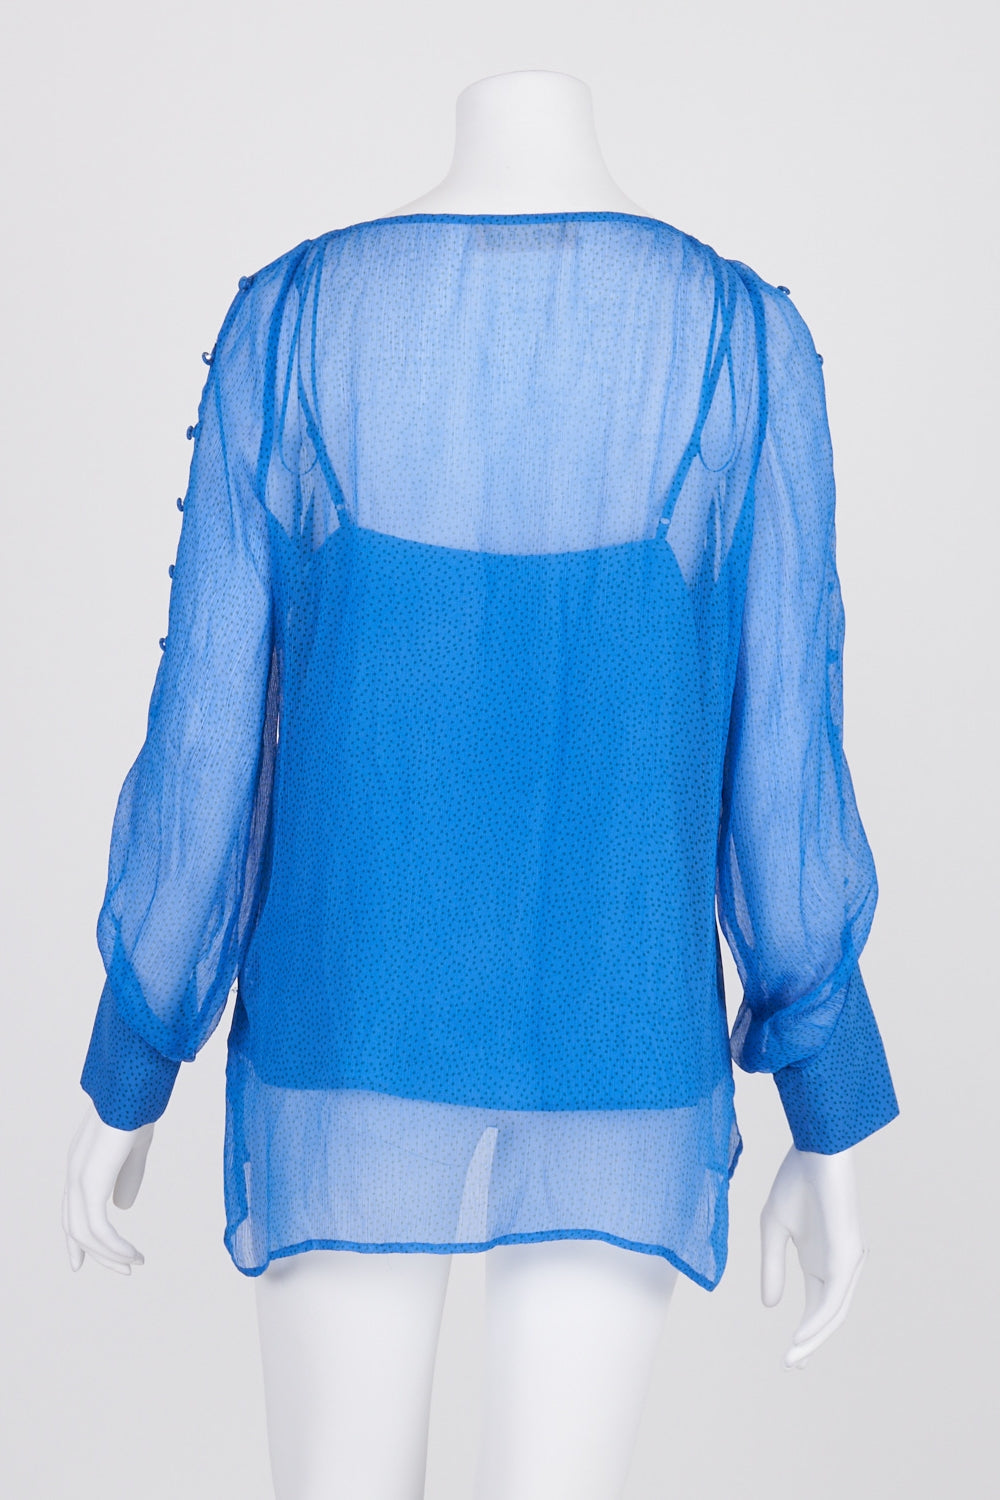 Cable Melbourne Blue Patterned Sheer Top M